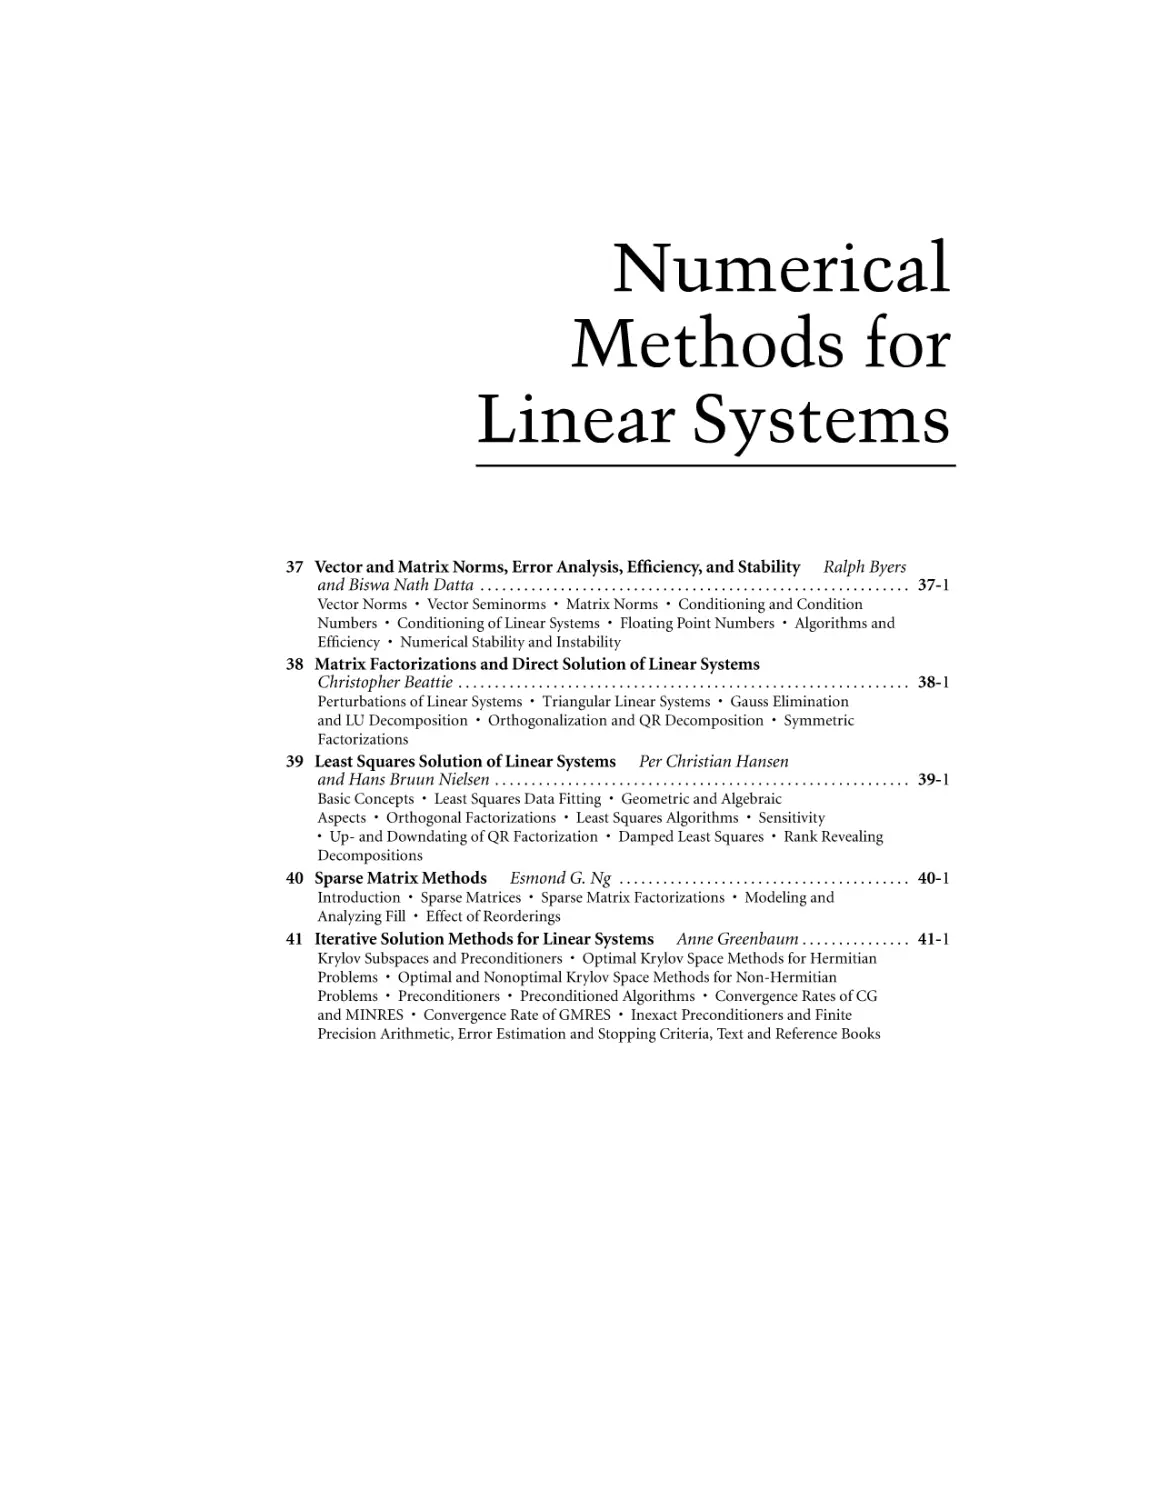 Numerical Methods for Linear Systems